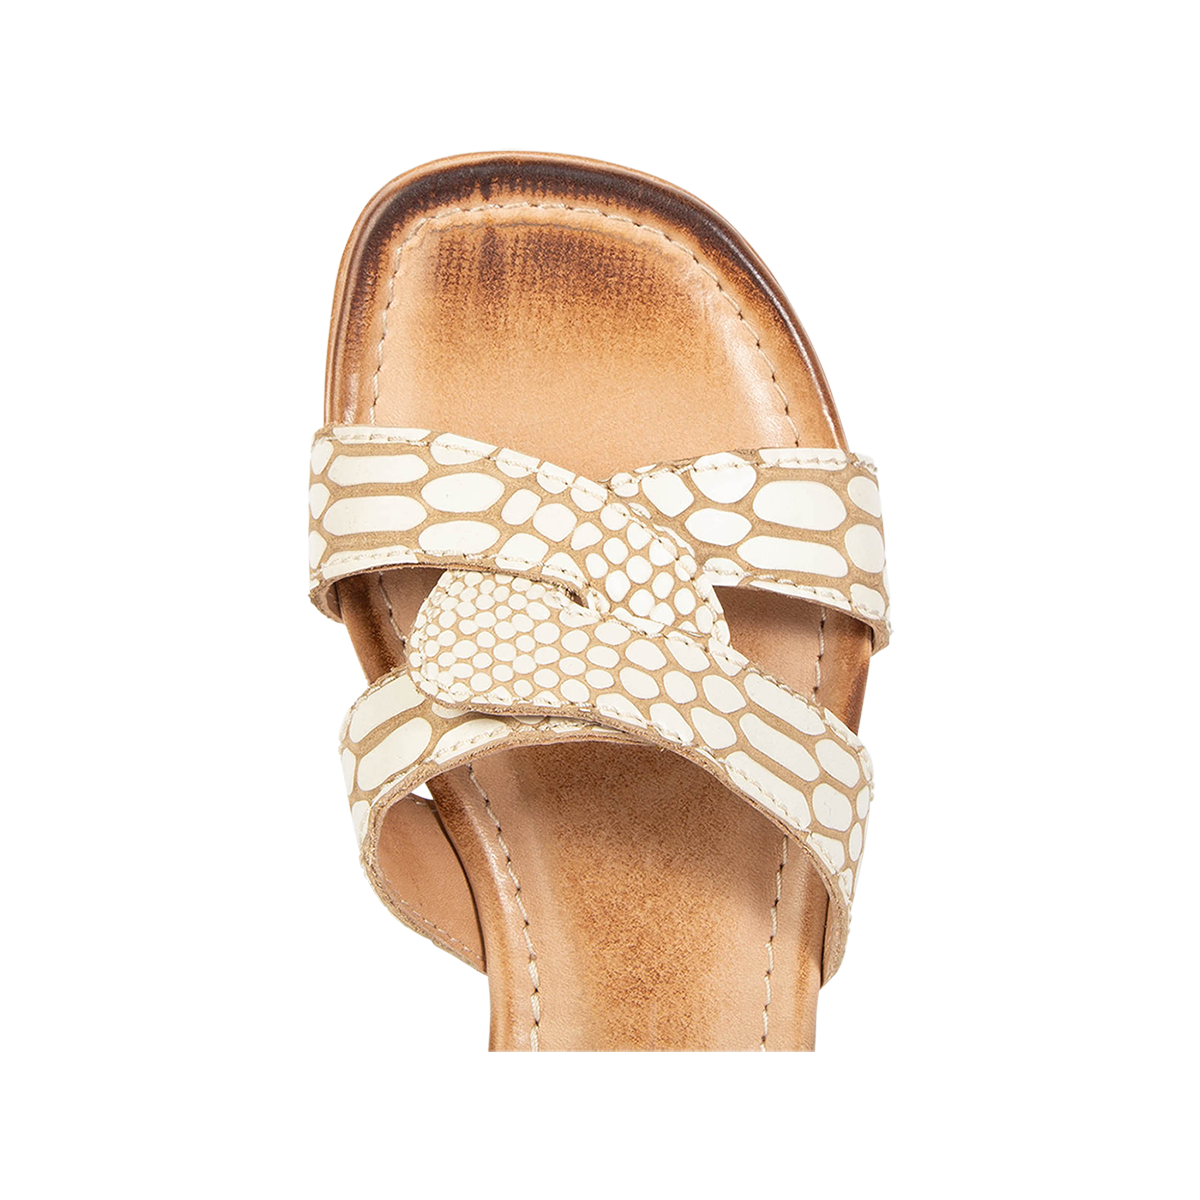 Top view showing criss-cross leather foot strap on FREEBIRD women's Sawyer white snake low heeled sandal